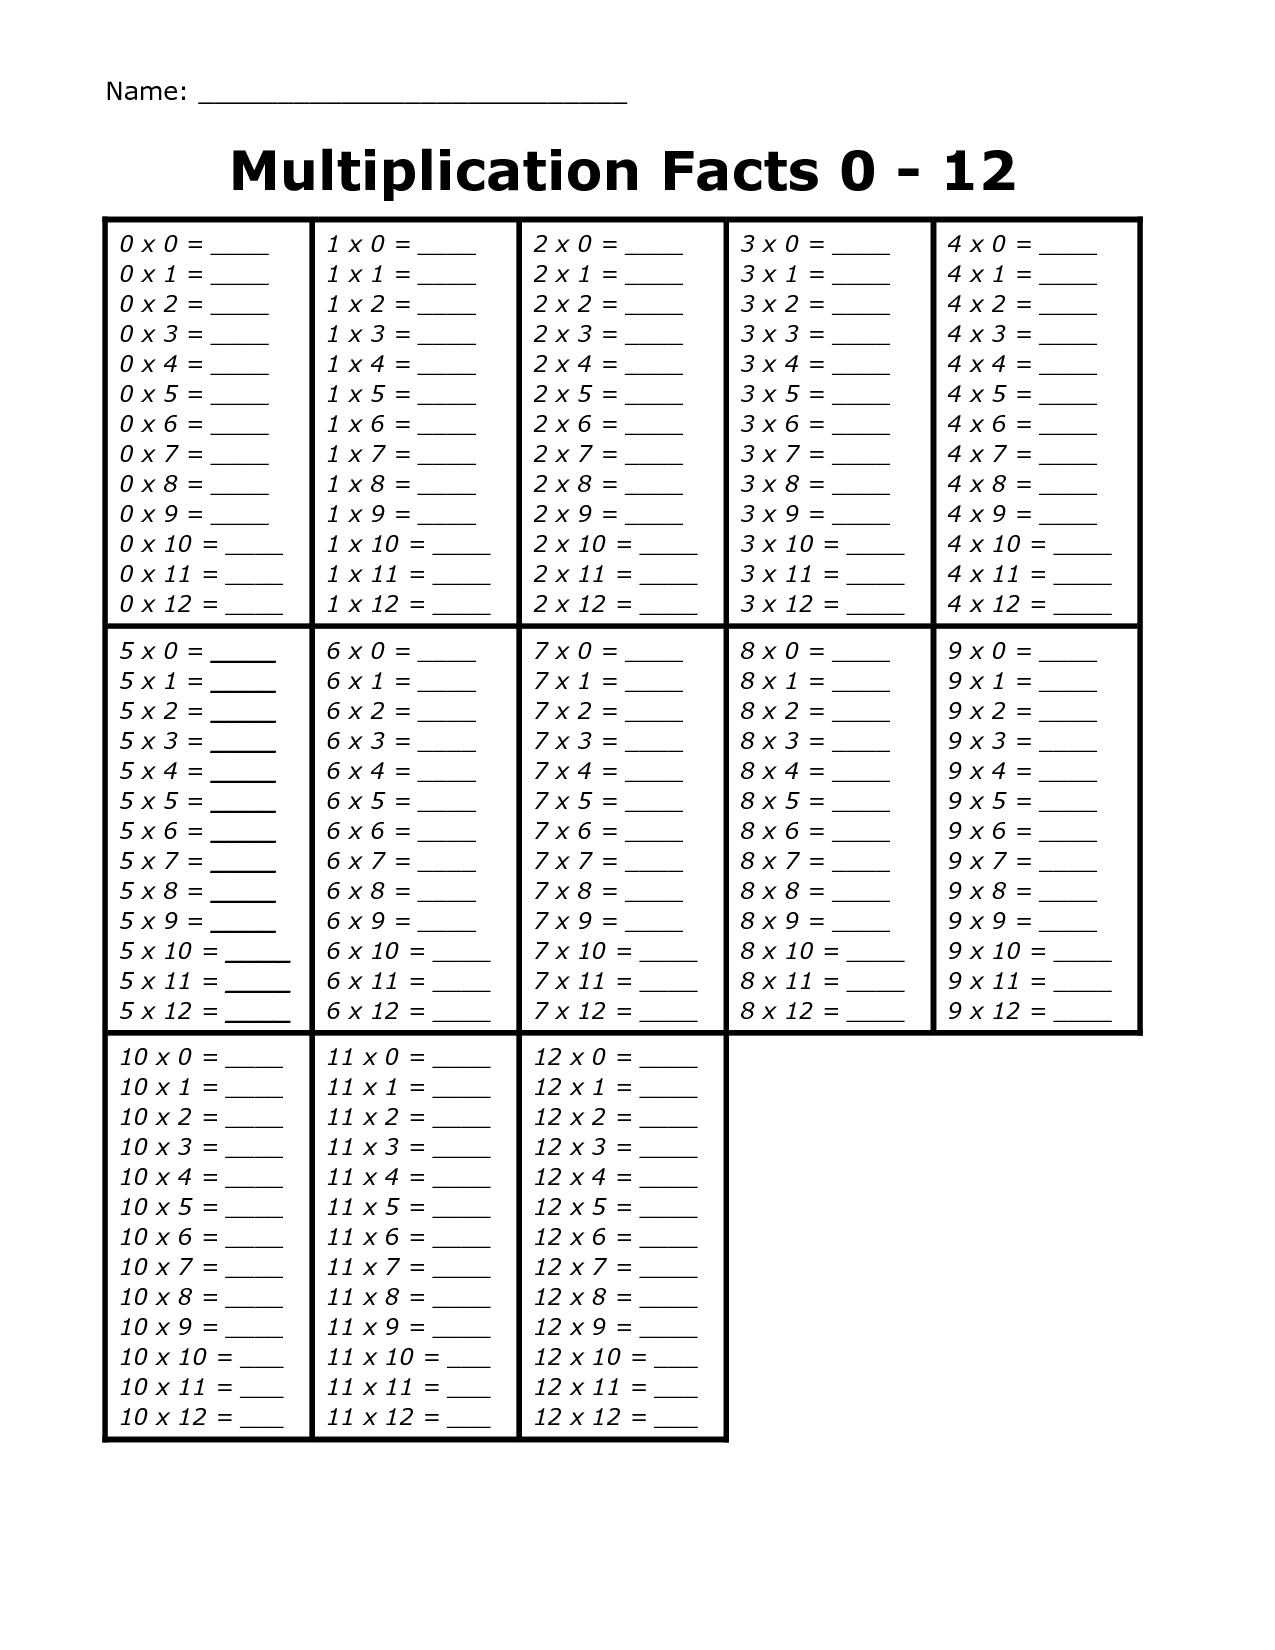 Printable Multiplication Facts 0 12 | Multiplication Facts with regard to Printable Multiplication Facts Test